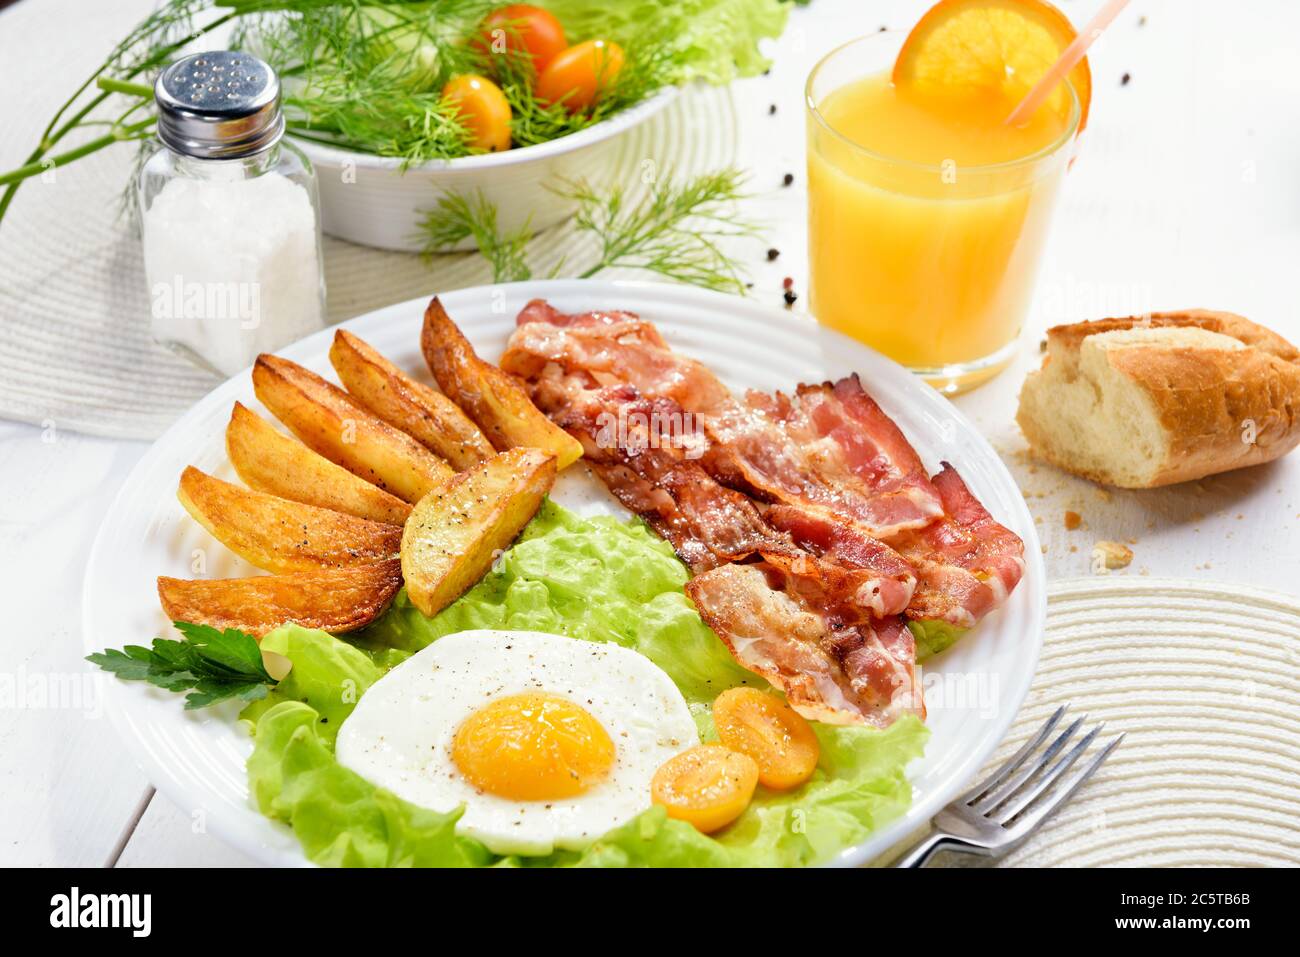 Morning breakfast with delicious fried bacon, French fries and tender egg, close-up. Stock Photo